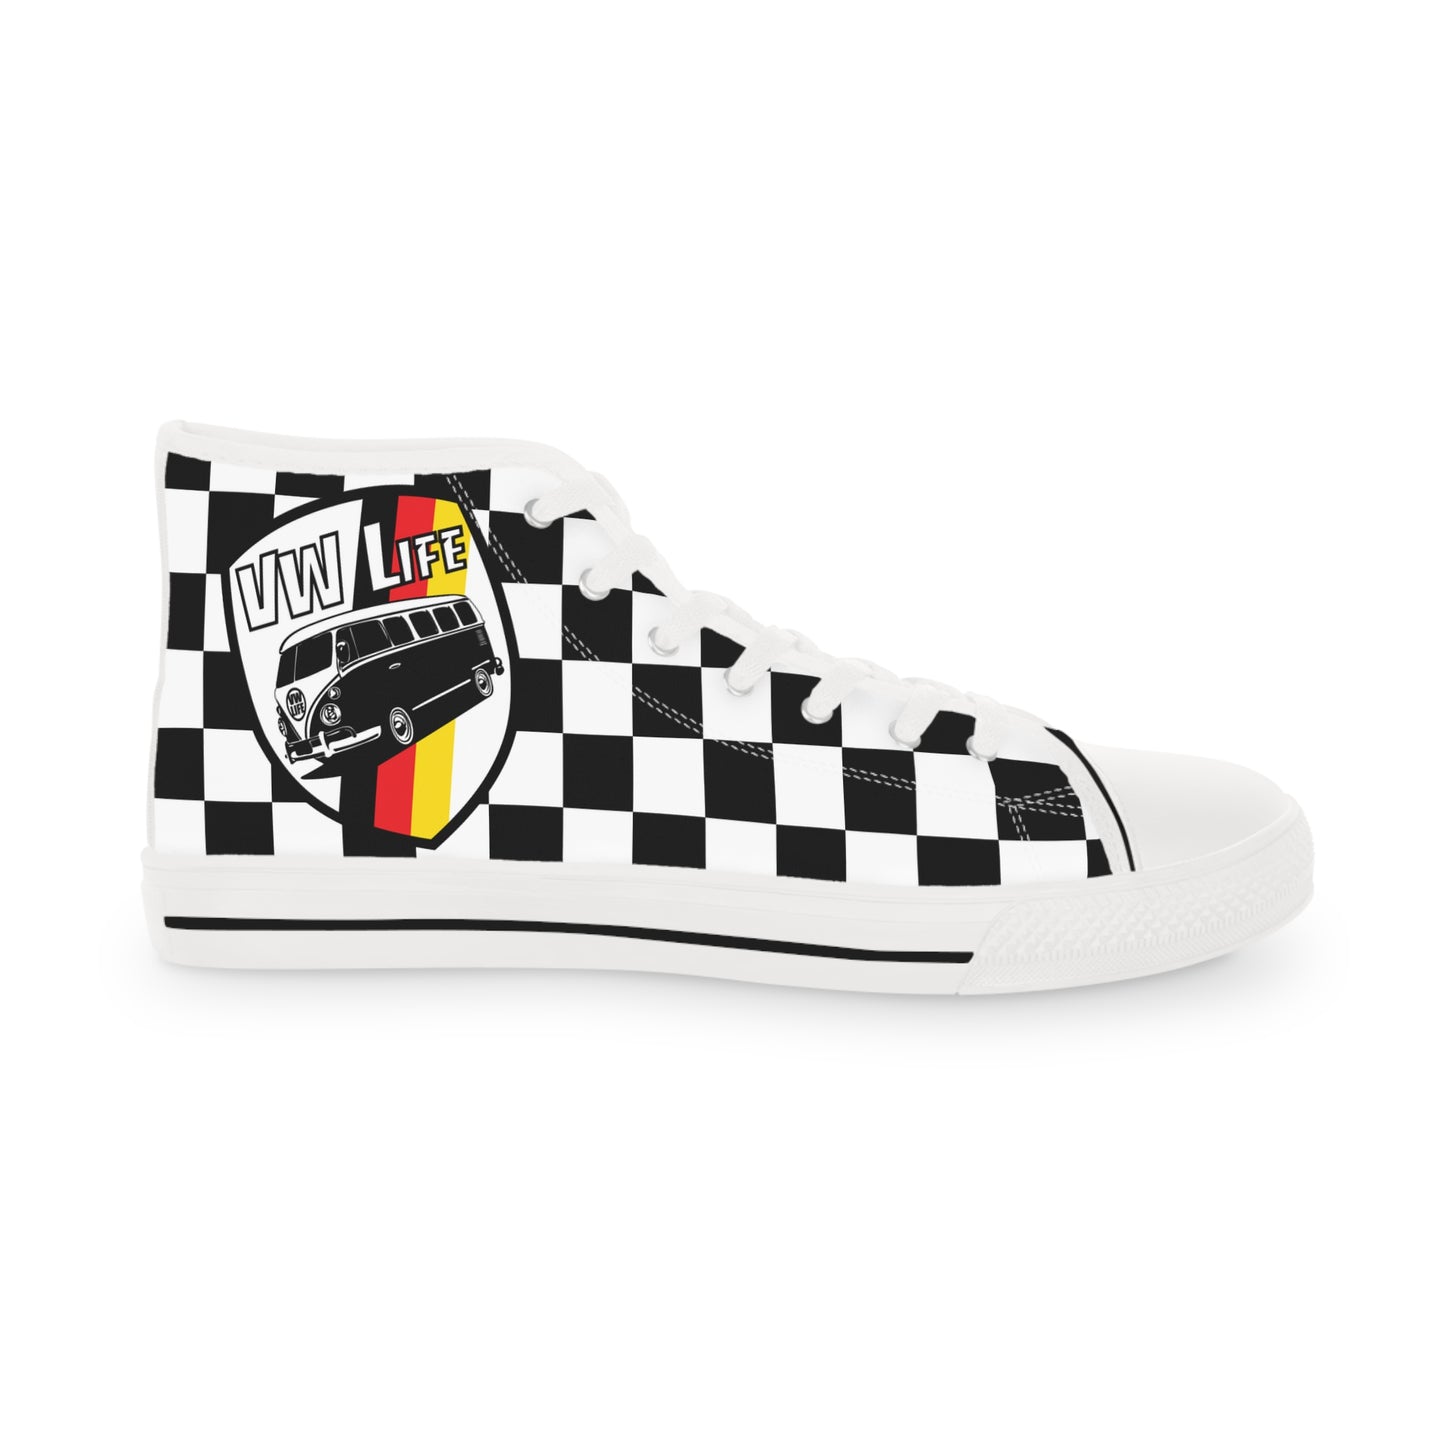 VWLife Men's High Top Checkered Sneakers